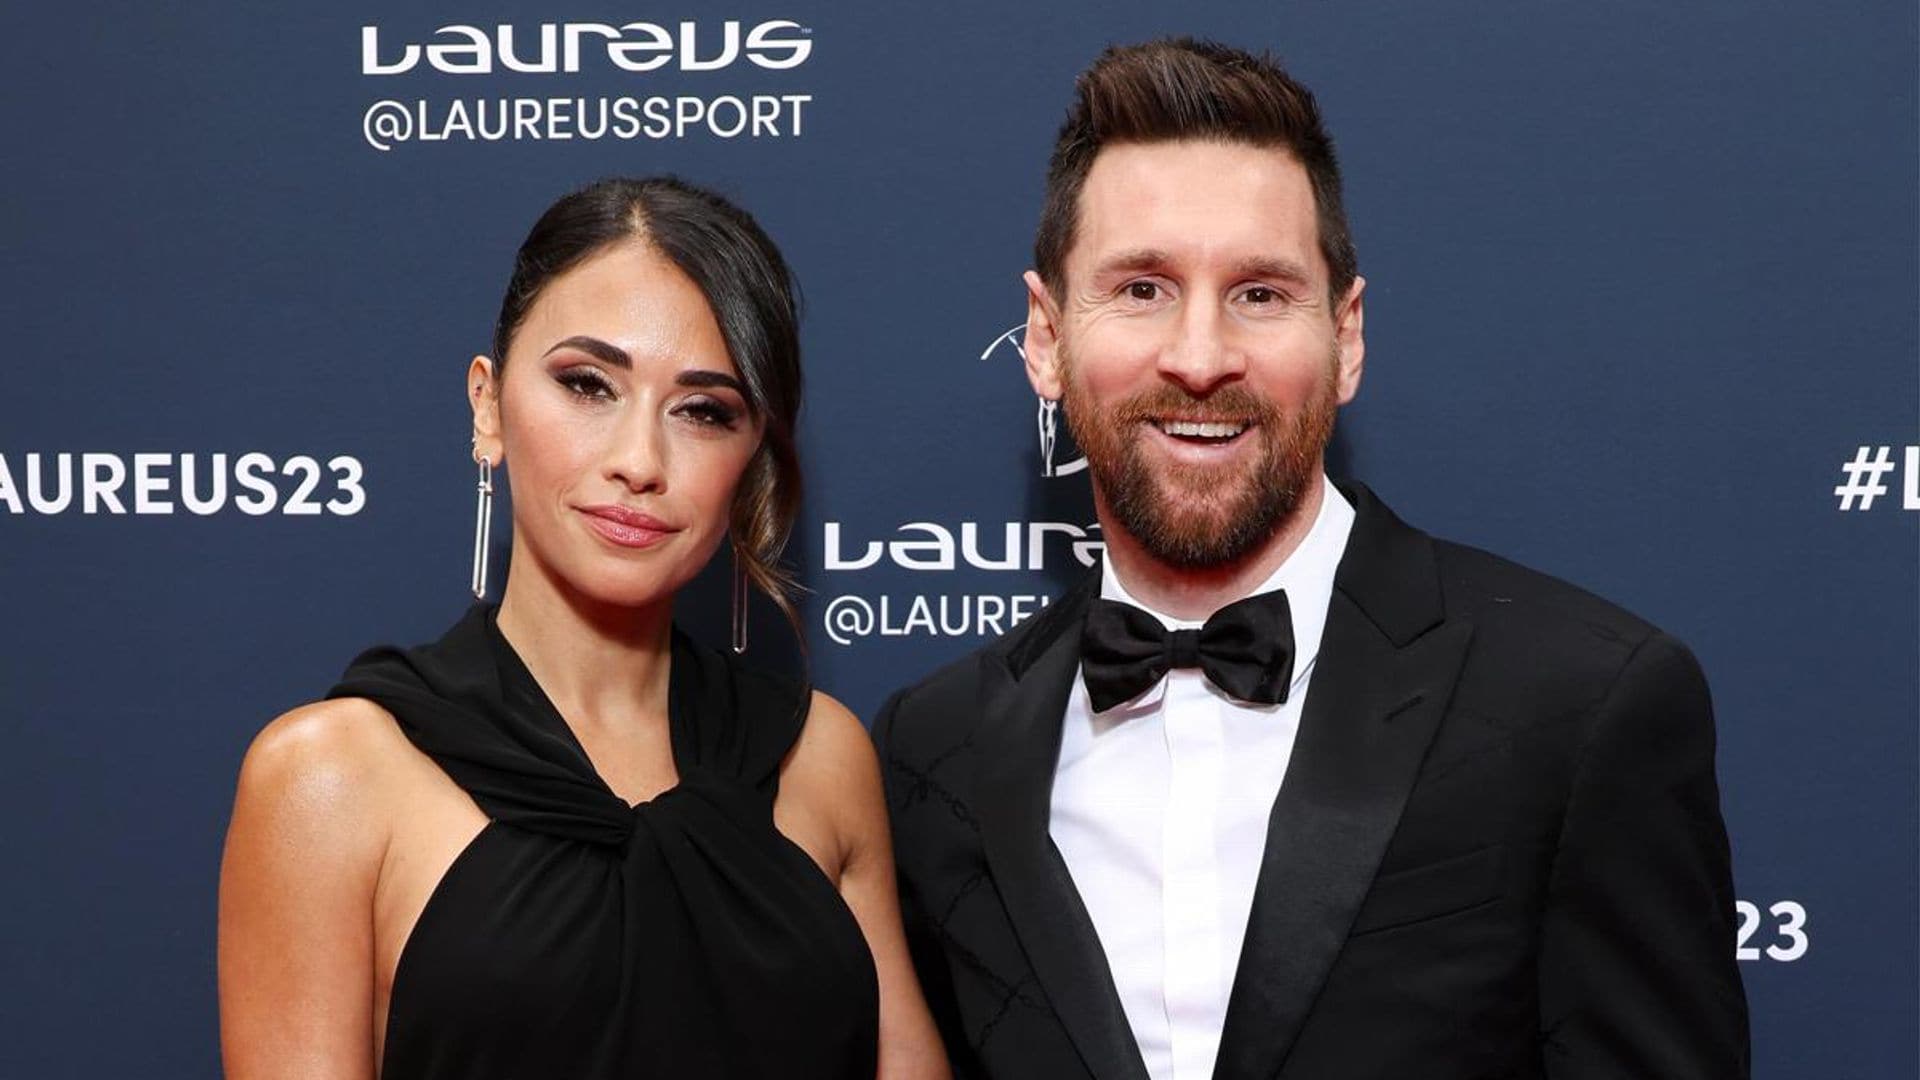 WATCH: Lionel Messi and Antonela Roccuzzo cheer on Maria Becerra in Miami party